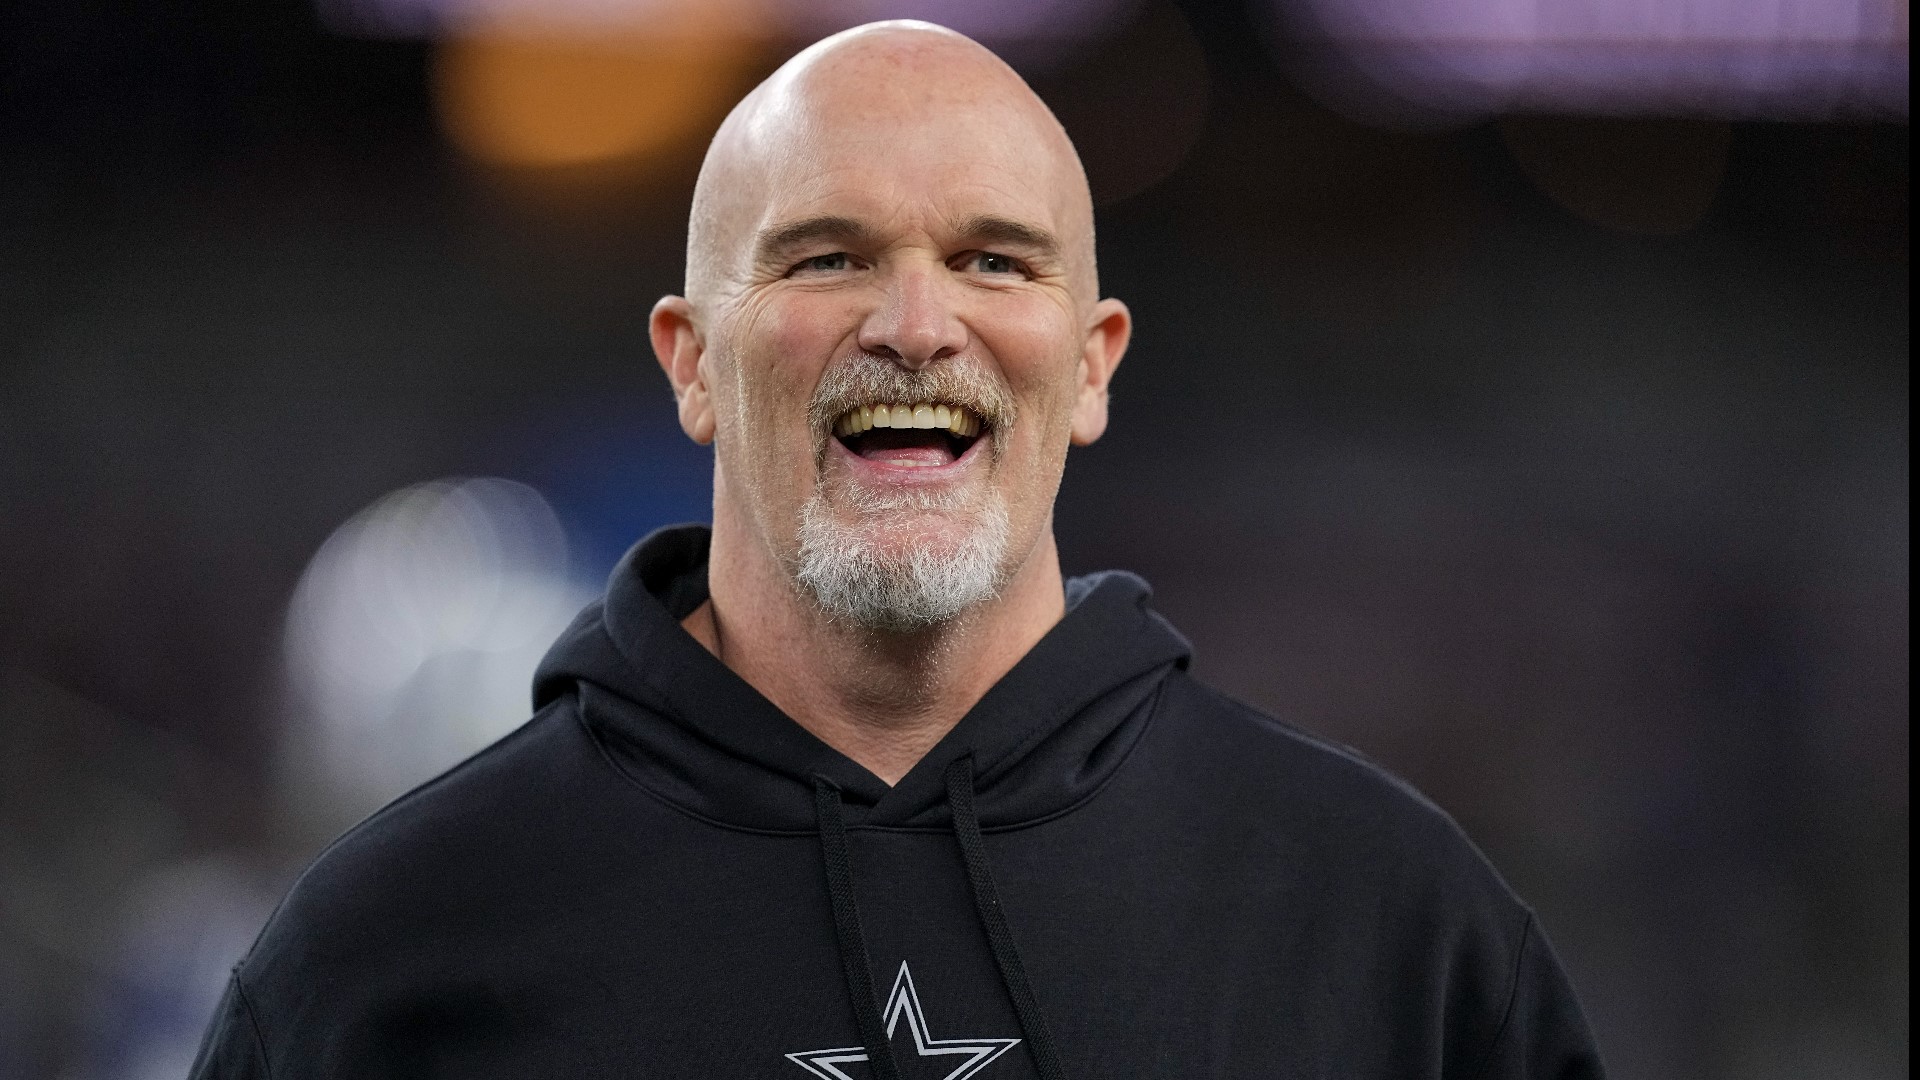 The team confirms a verbal agreement between the Commanders and the former Cowboys coordinator.